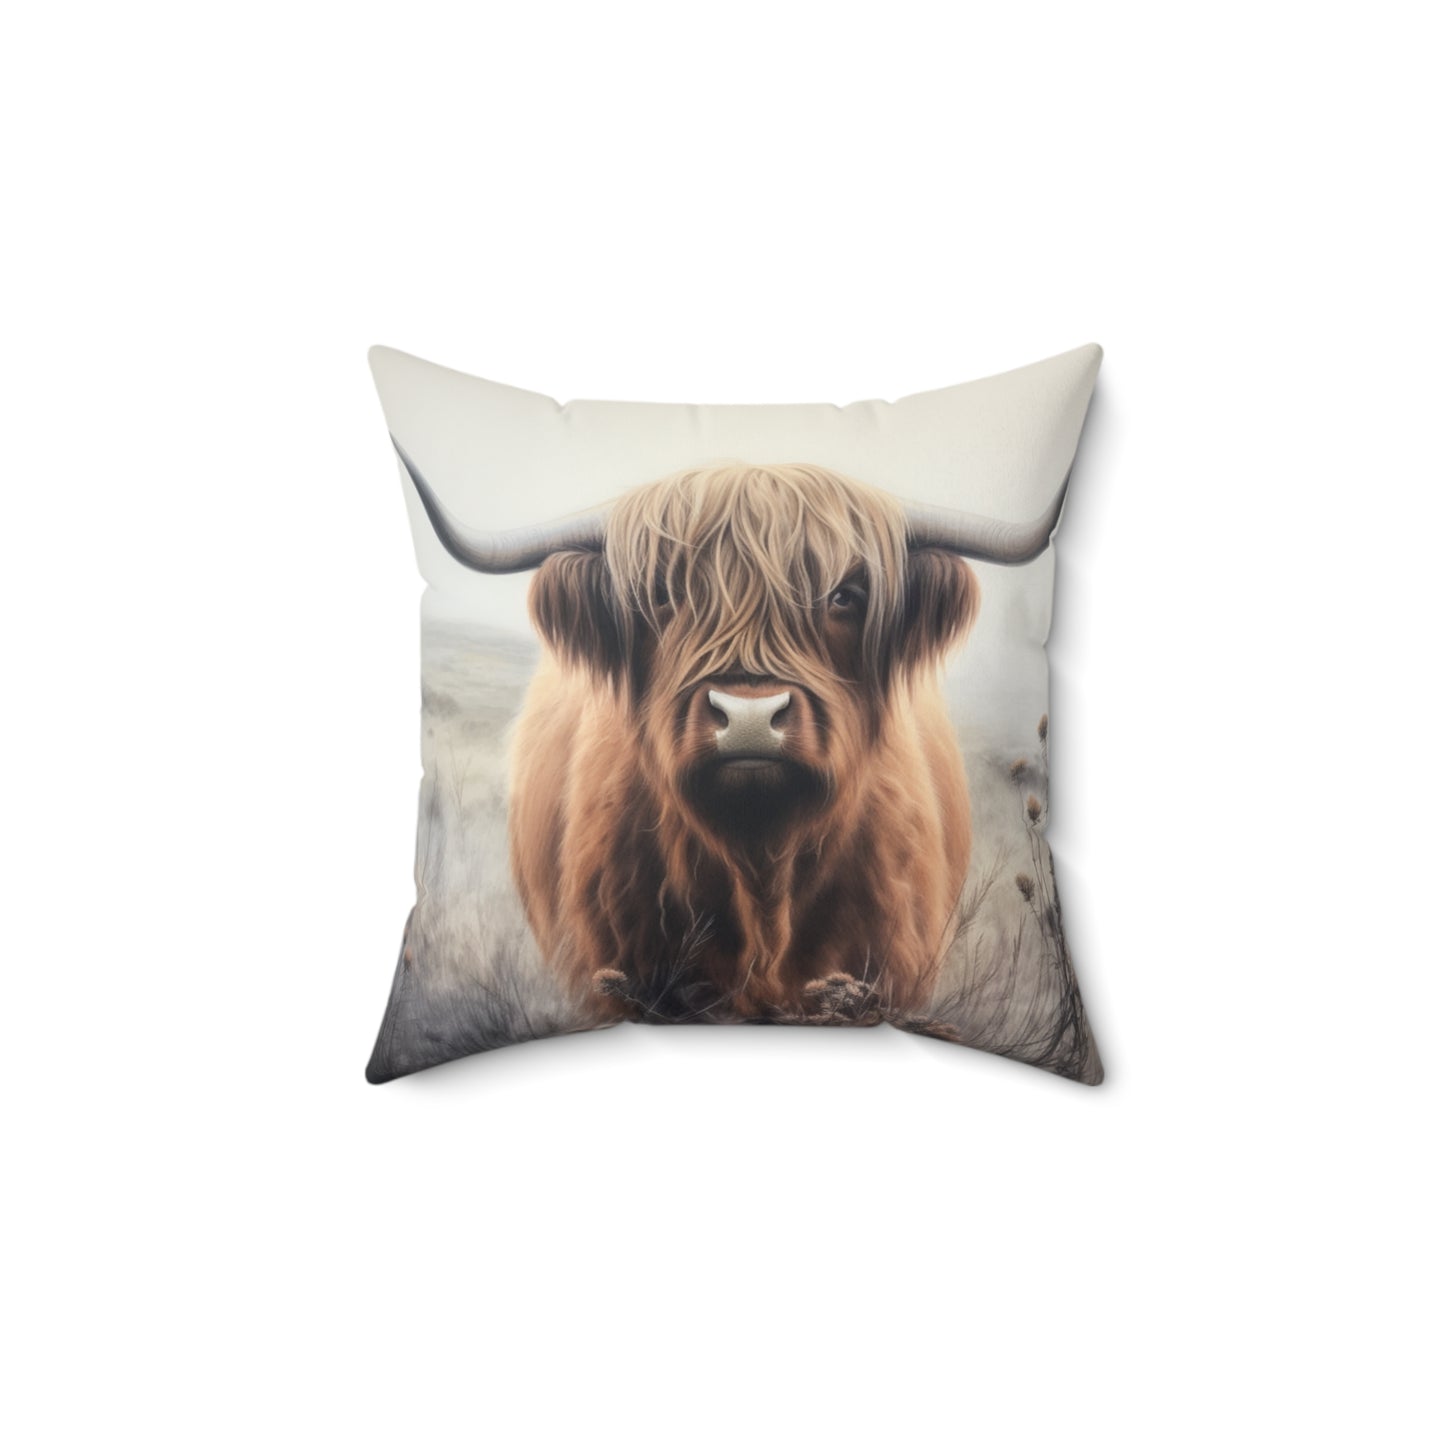 Highland Cow in Foggy Field Square Pillow - Rustic Home Decor Accent - Faux Suede Cover - Cow Lover Gift